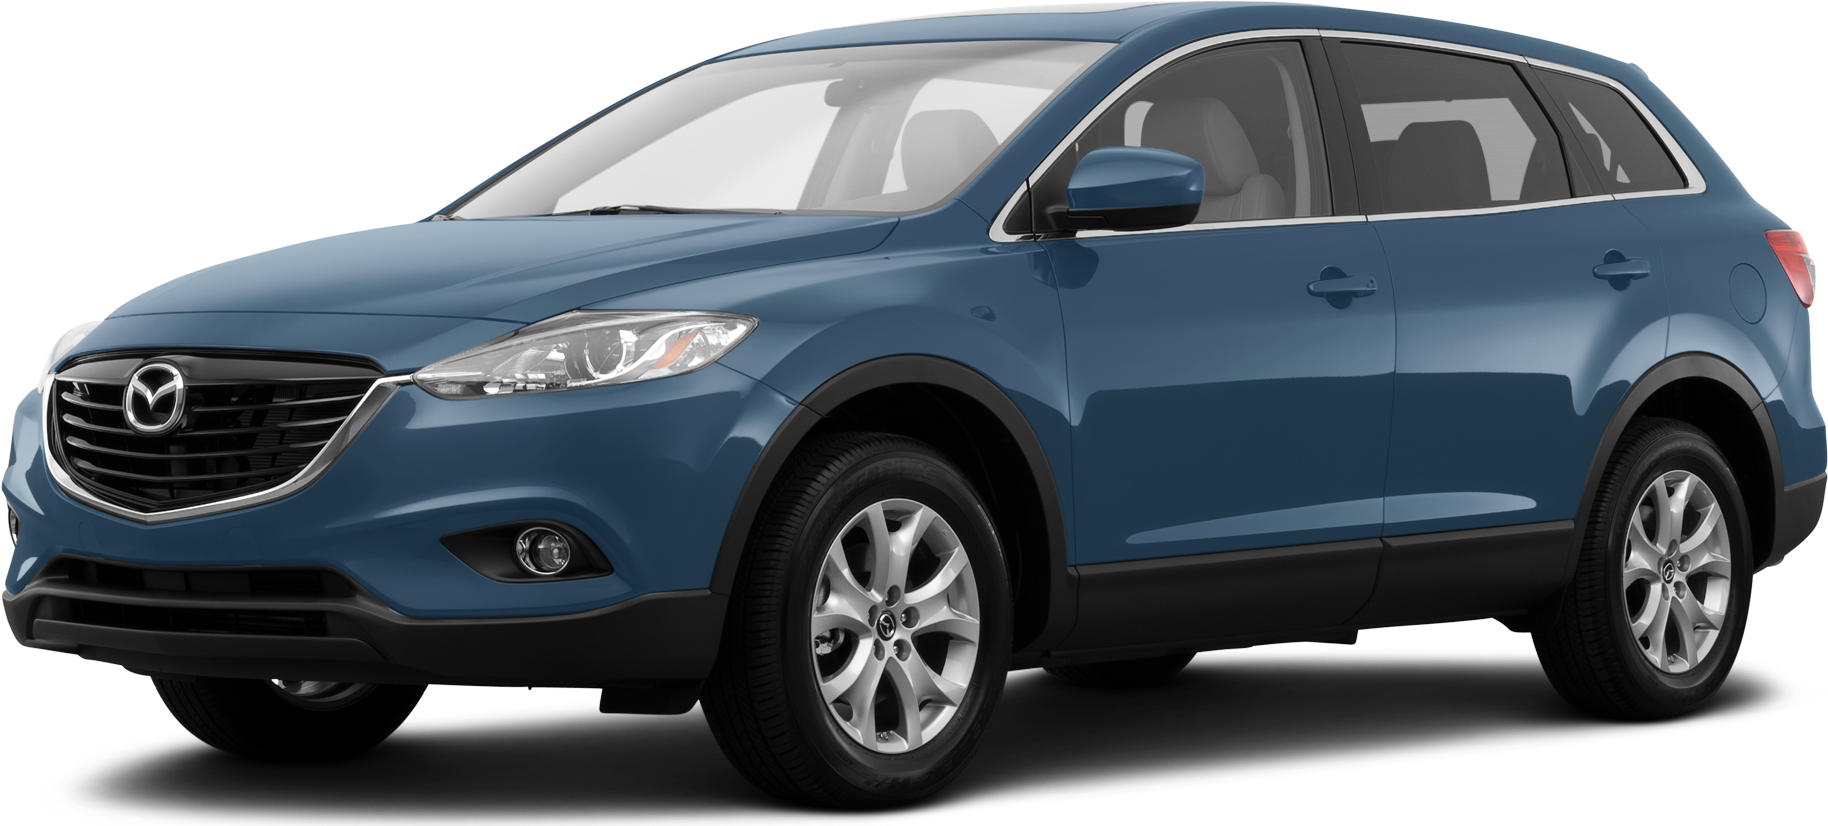 2014 Mazda Cx 9 Price Value Ratings And Reviews Kelley Blue Book